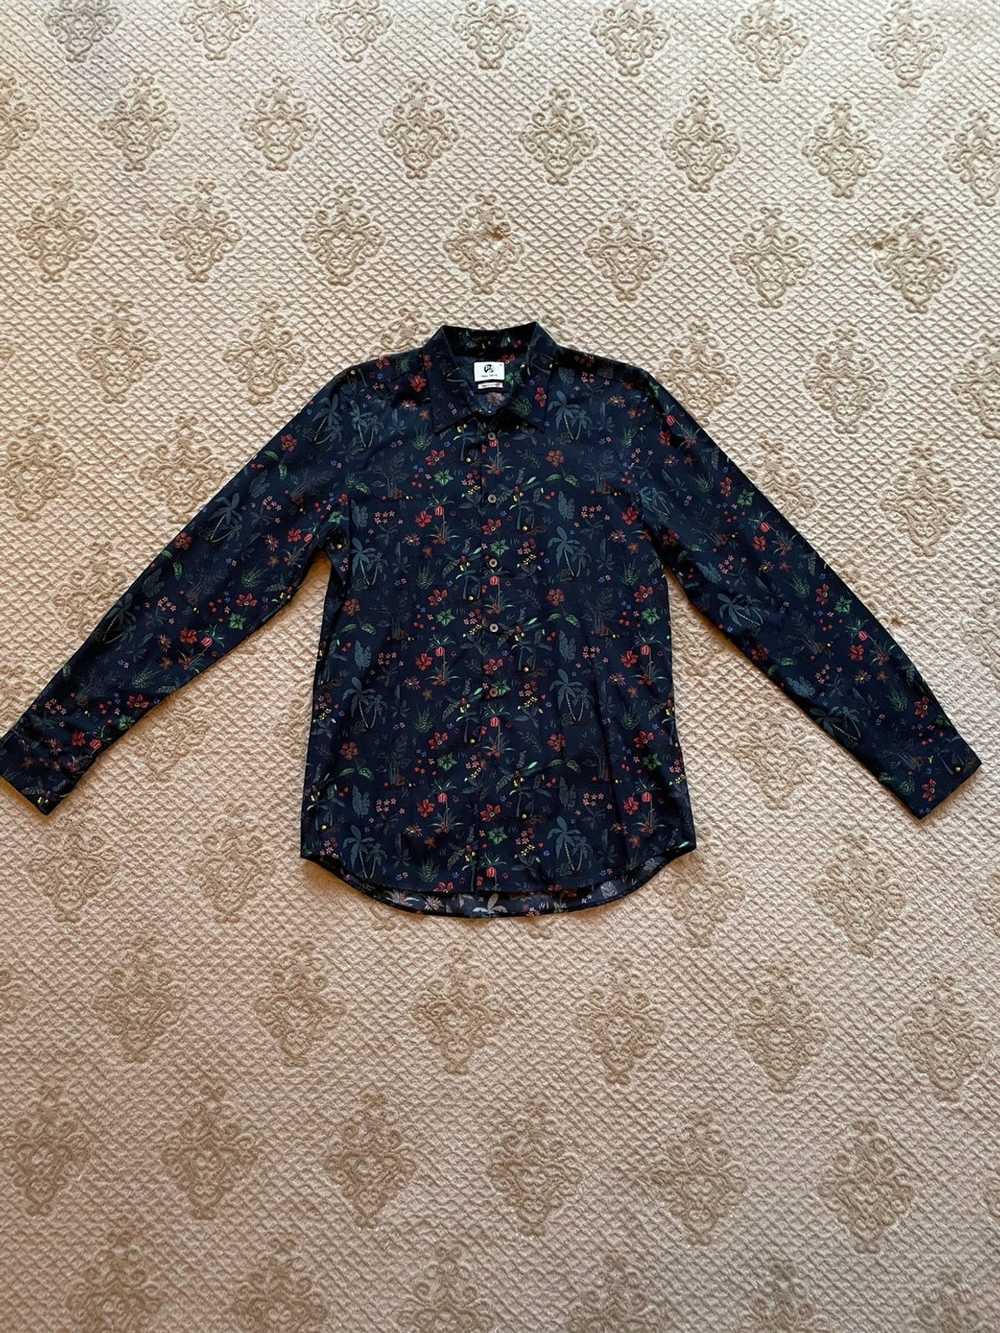 Paul Smith Navy Floral Shirt - image 1